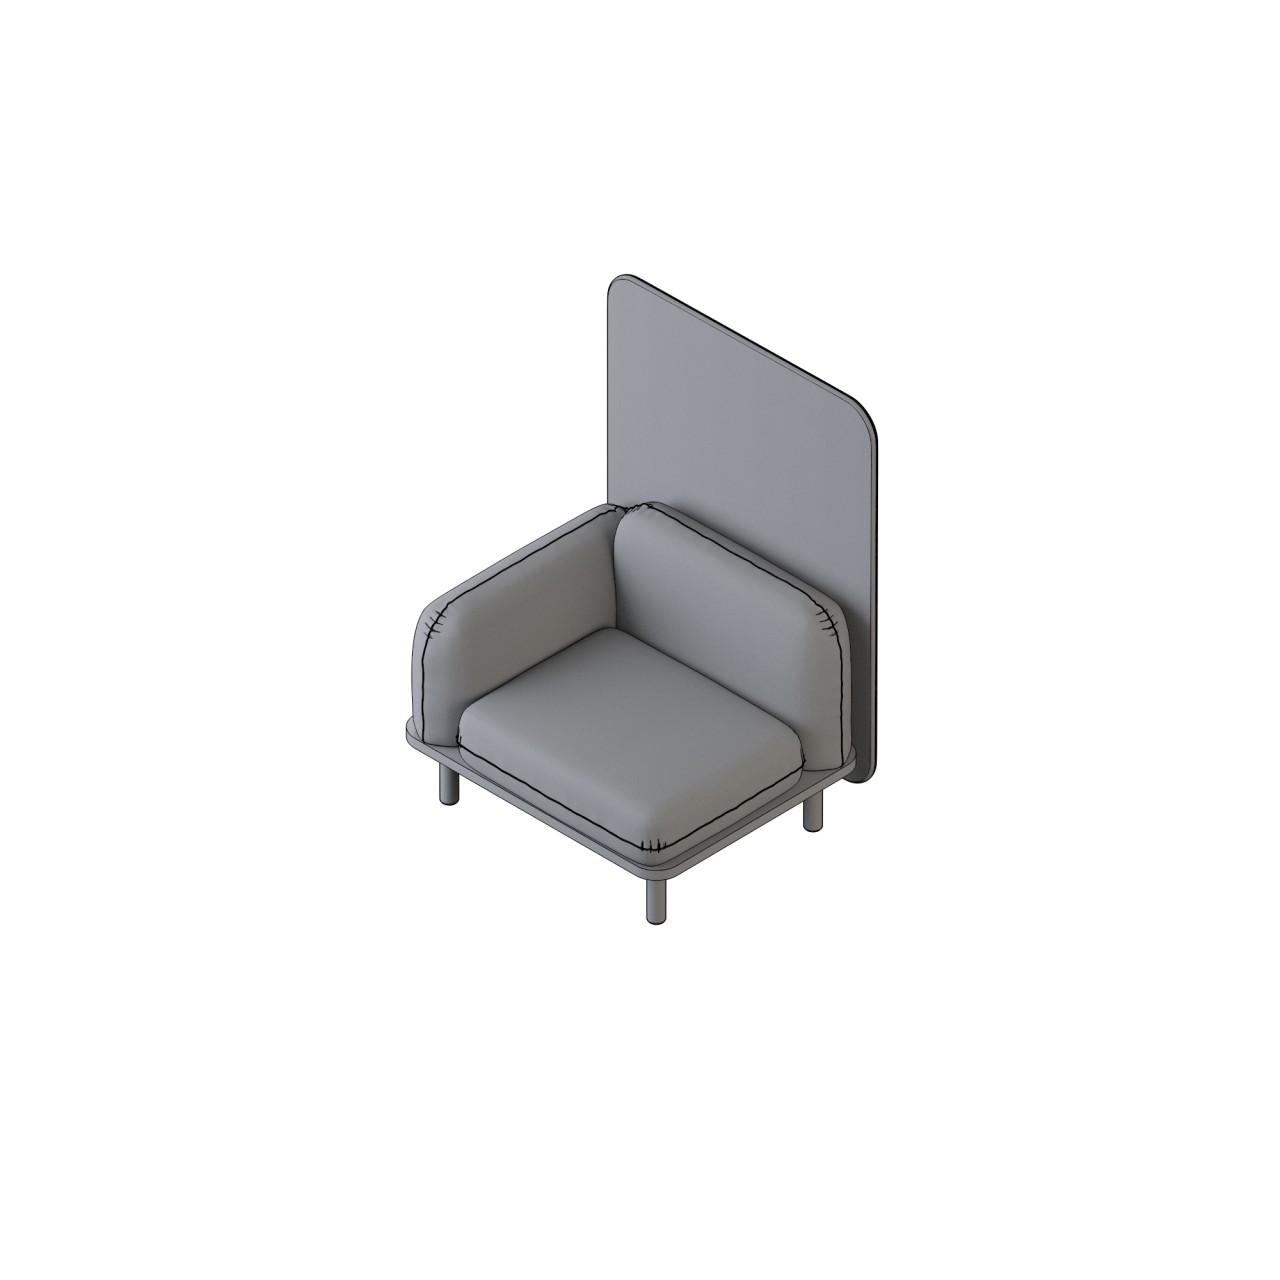 Soft - 24005R-B
right arm privacy
COM 9.25
arms 1.25,
back 1.5, base 1.5,
seat 2.5, panel 3